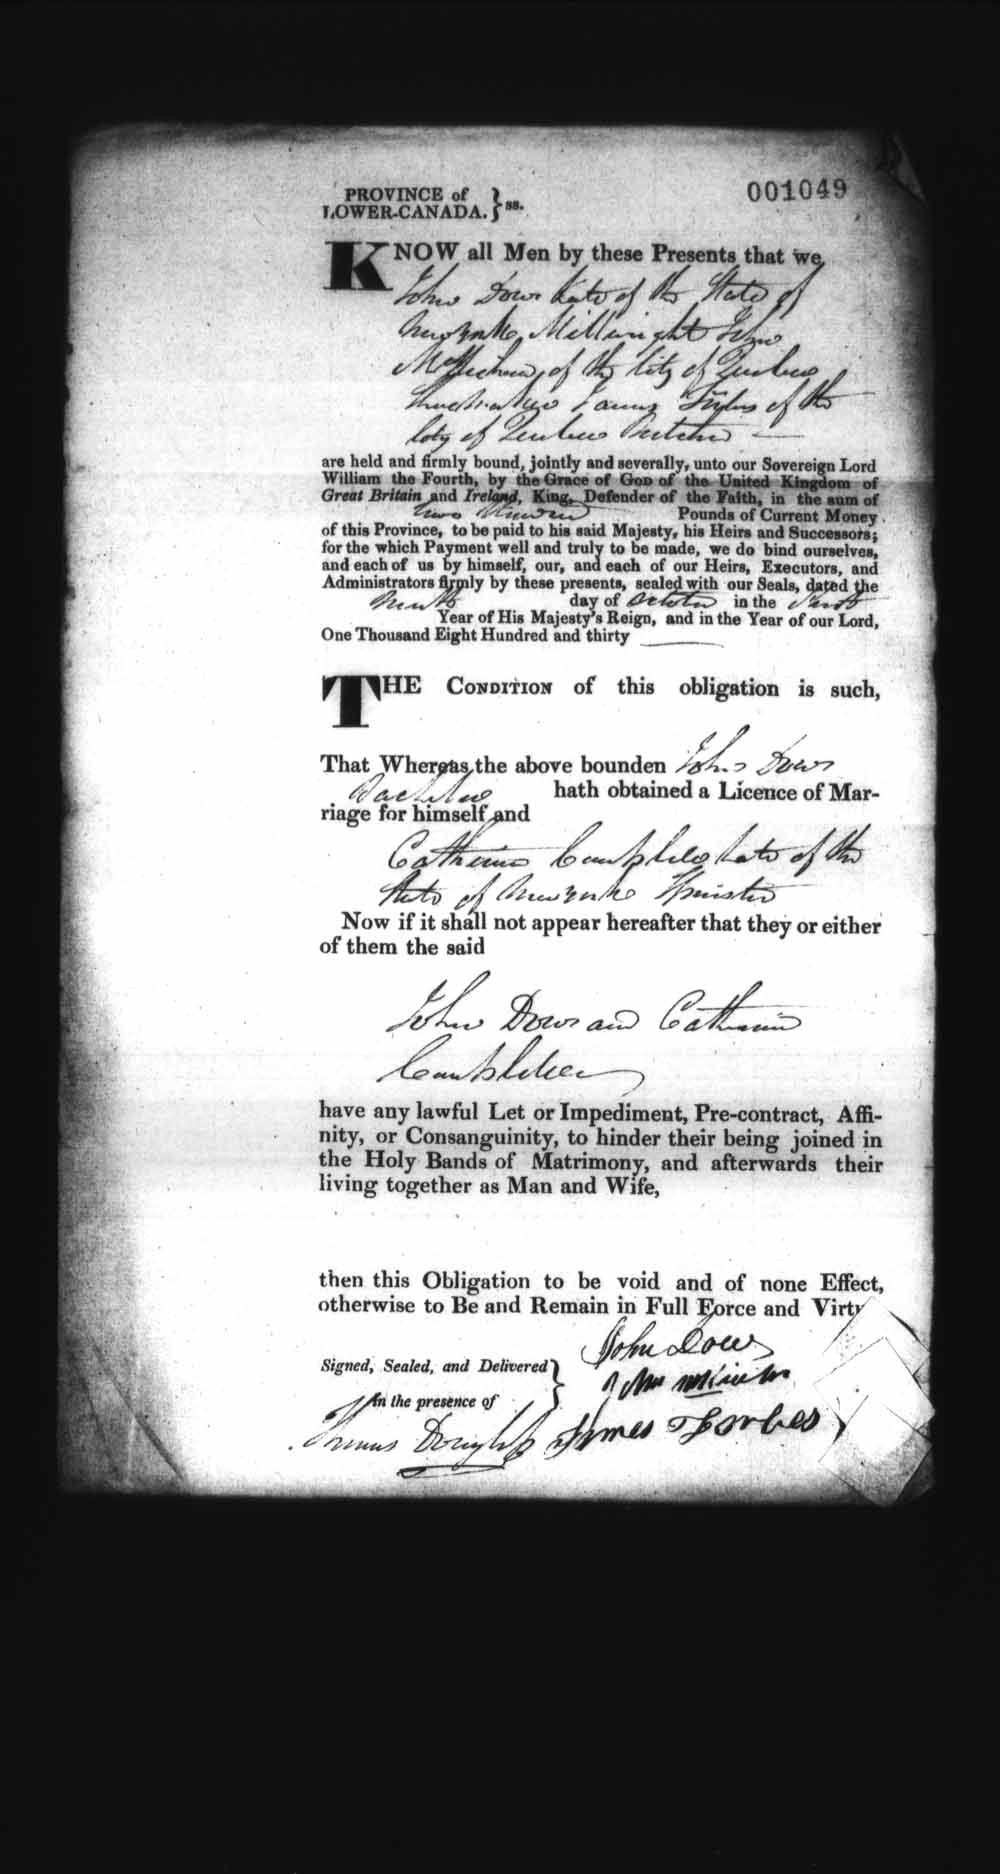 Digitized page of Upper and Lower Canada Marriage Bonds (1779-1865) for Image No.: e008237173